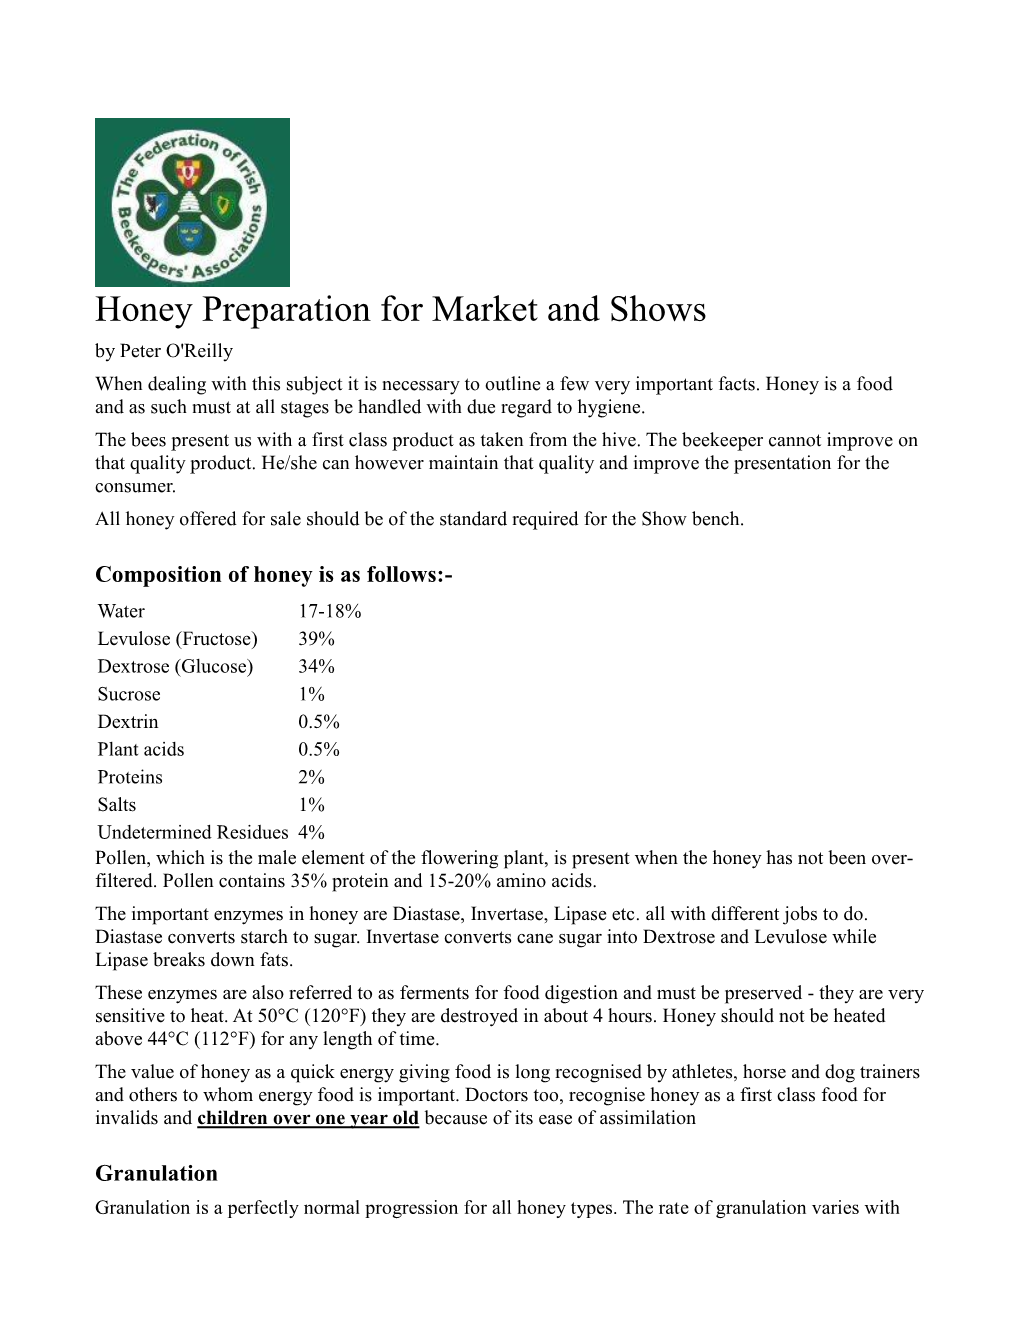 Honey Preparation for Market and Shows by Peter O'reilly When Dealing with This Subject It Is Necessary to Outline a Few Very Important Facts